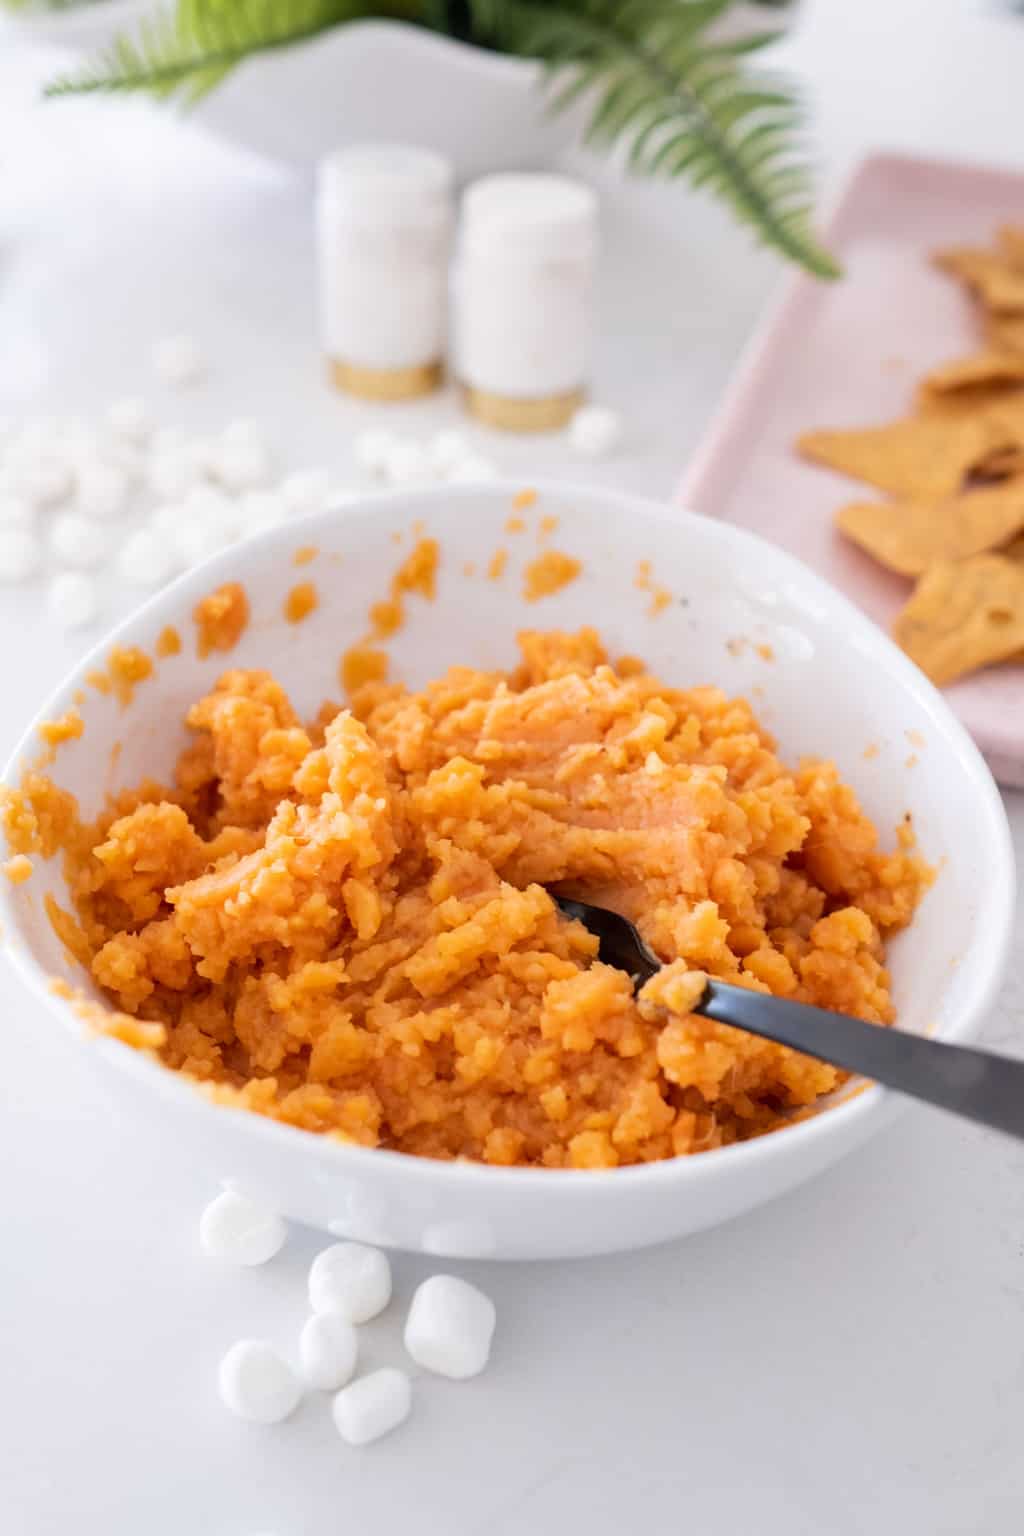 photo of the sweet potatoes being mashed for the Sweet Potato Nachos Recipe by top Houston lifestyle blogger Ashley Rose of Sugar & Cloth